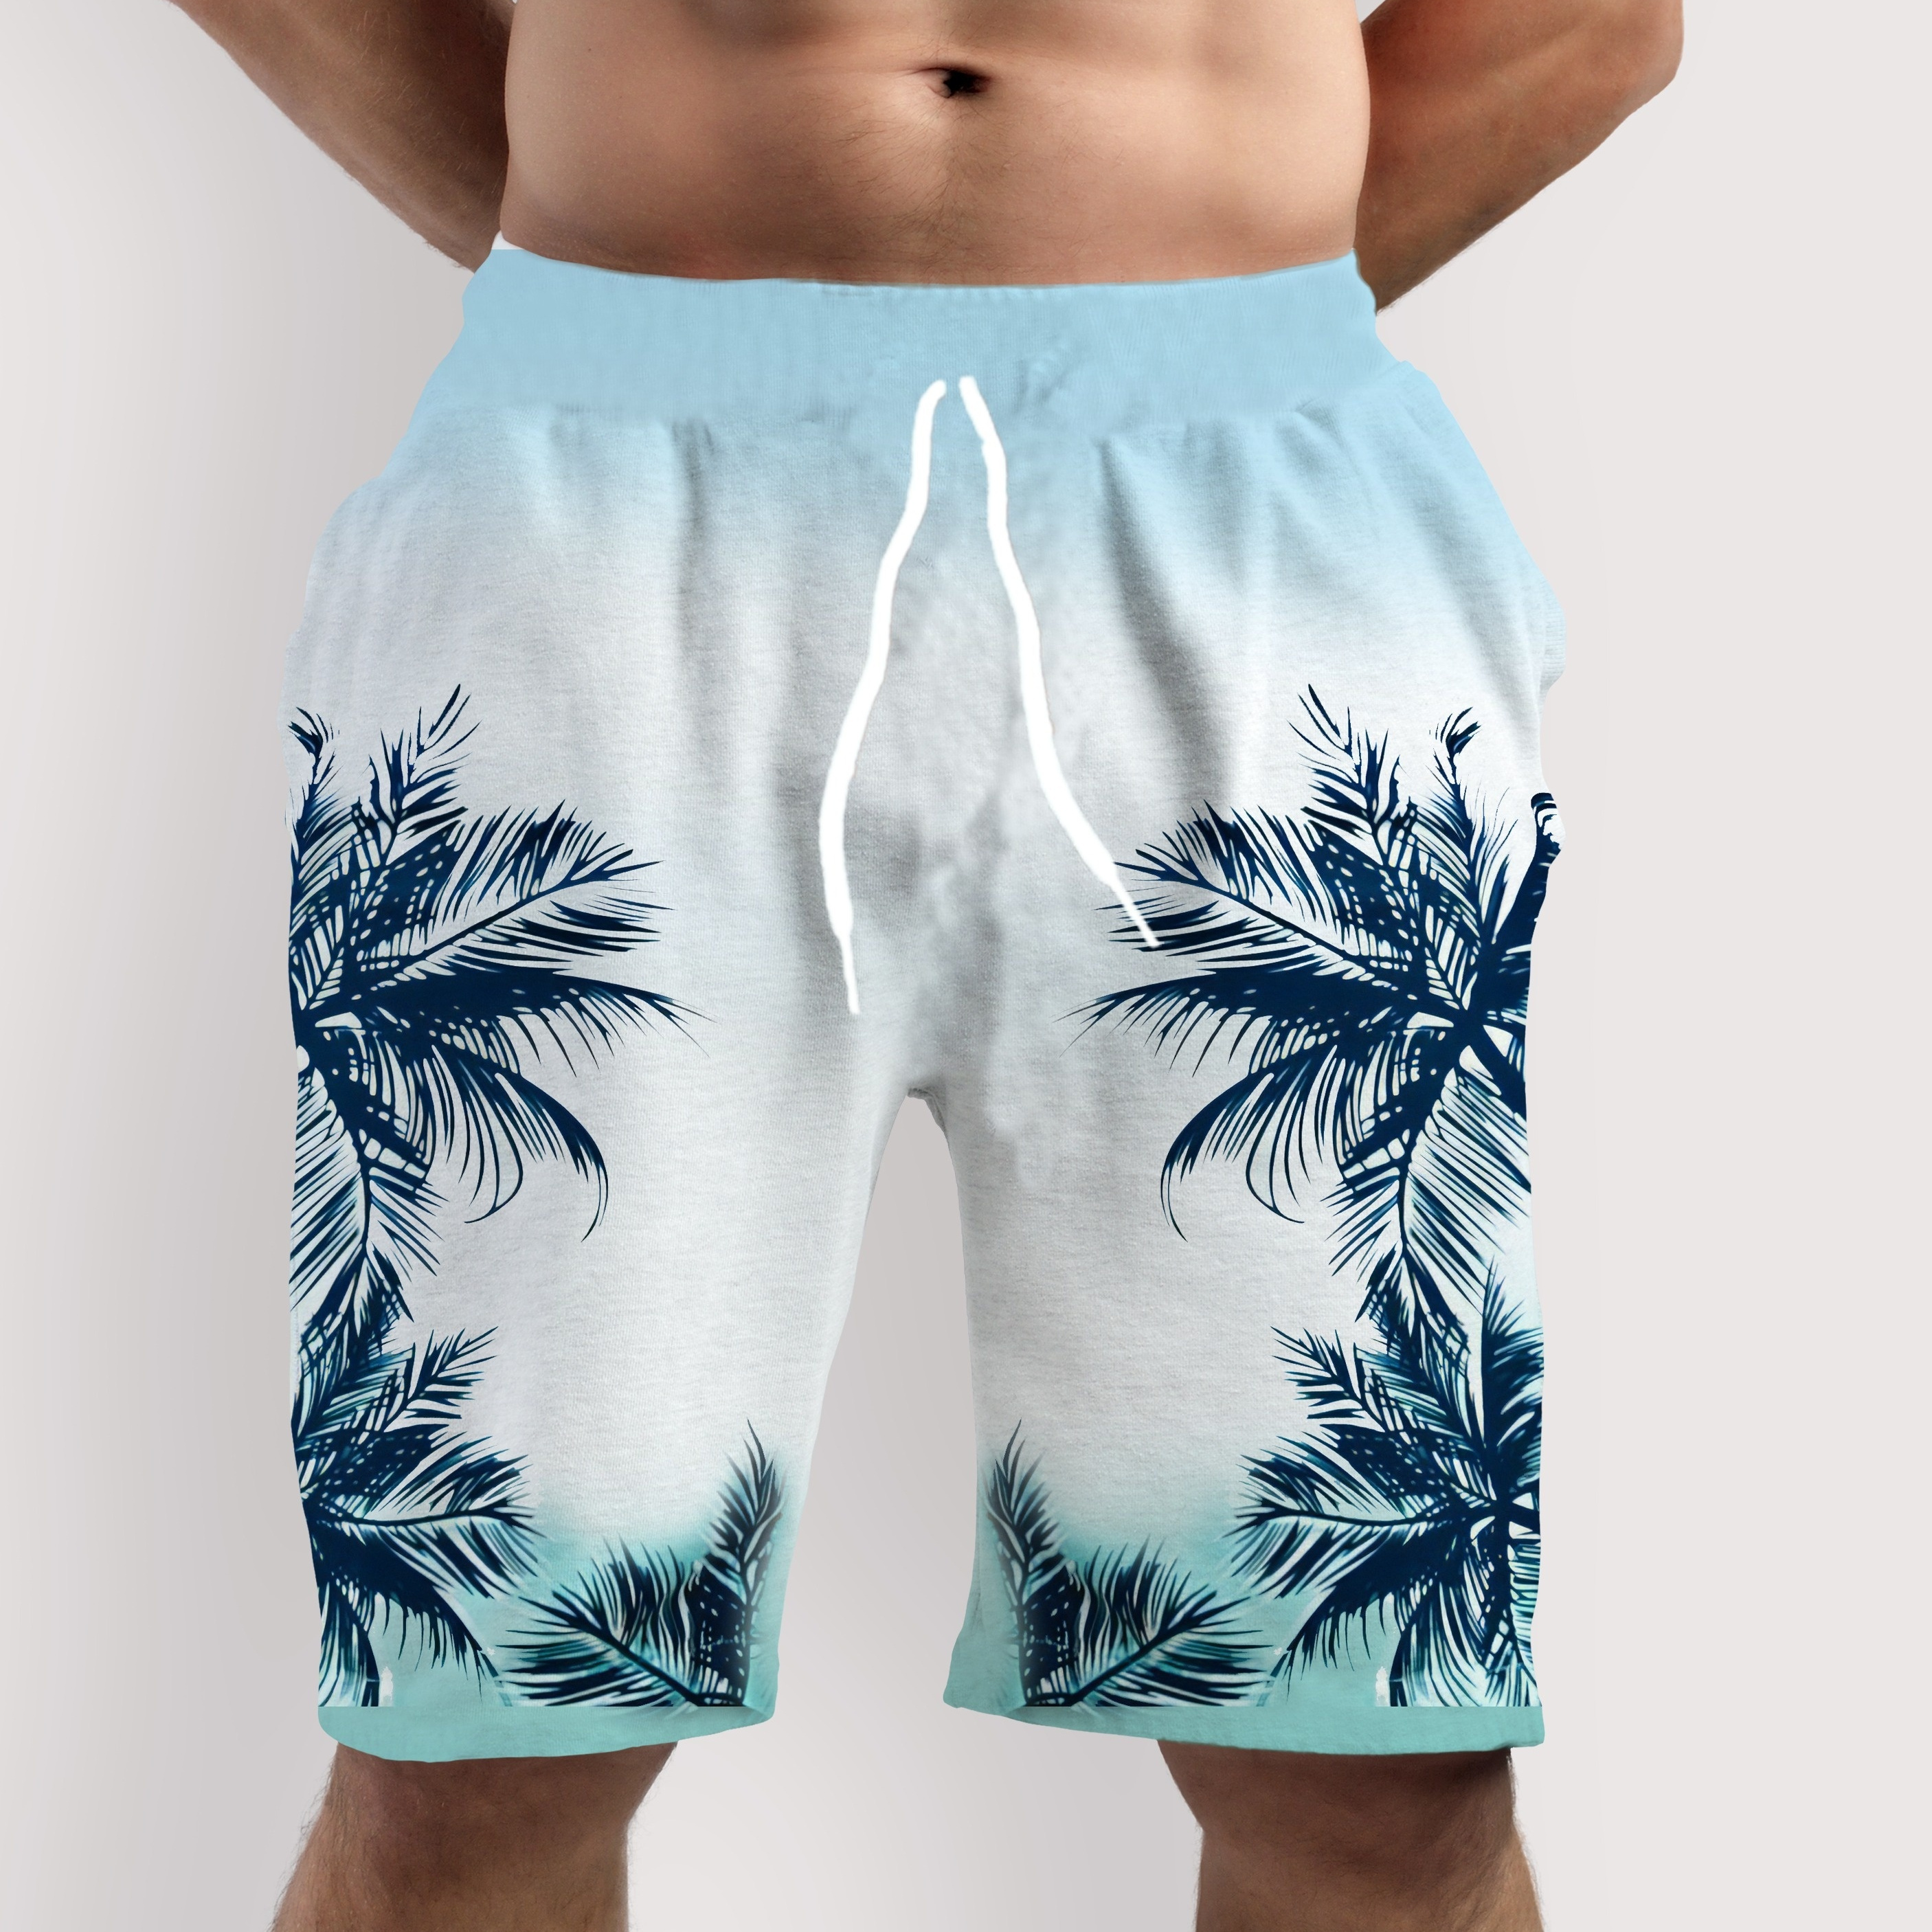 

Men's Casual And Fashionable Shorts With Tropical Palm Tree Print For Summer Vacation